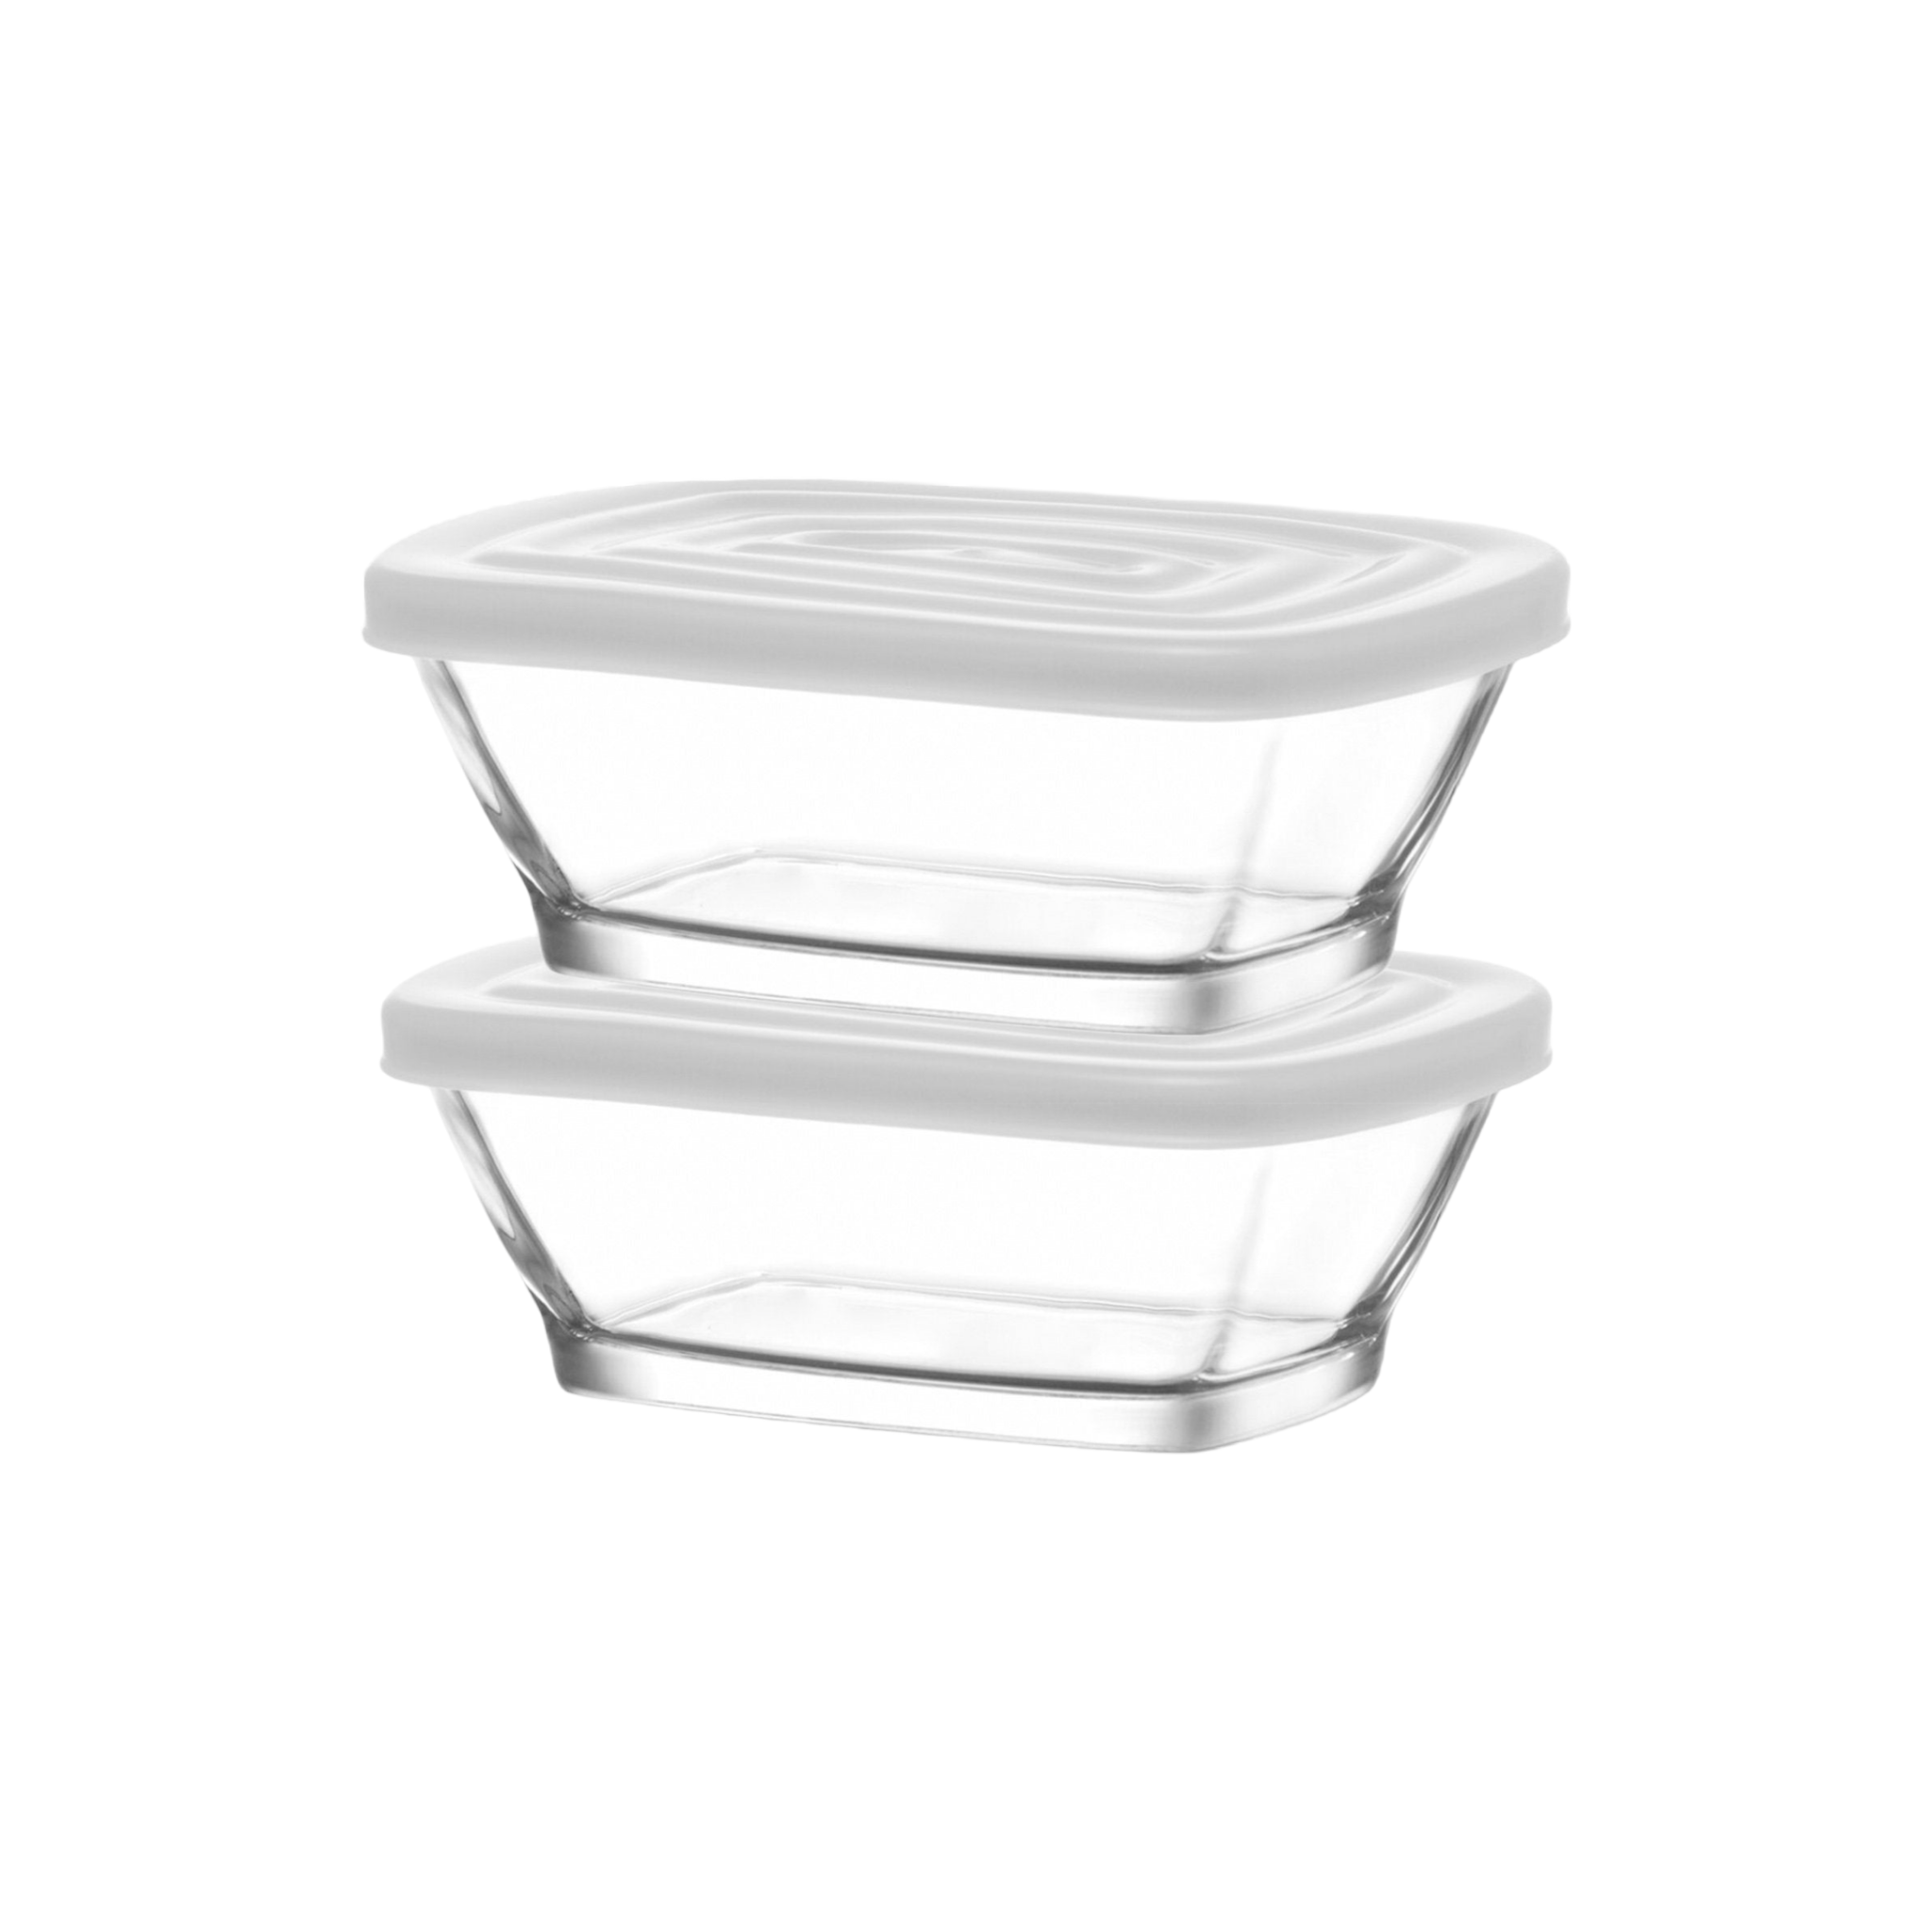 LAV Glass Tub 375ml Rectangular Jar with White Lid 2pc SGN2032